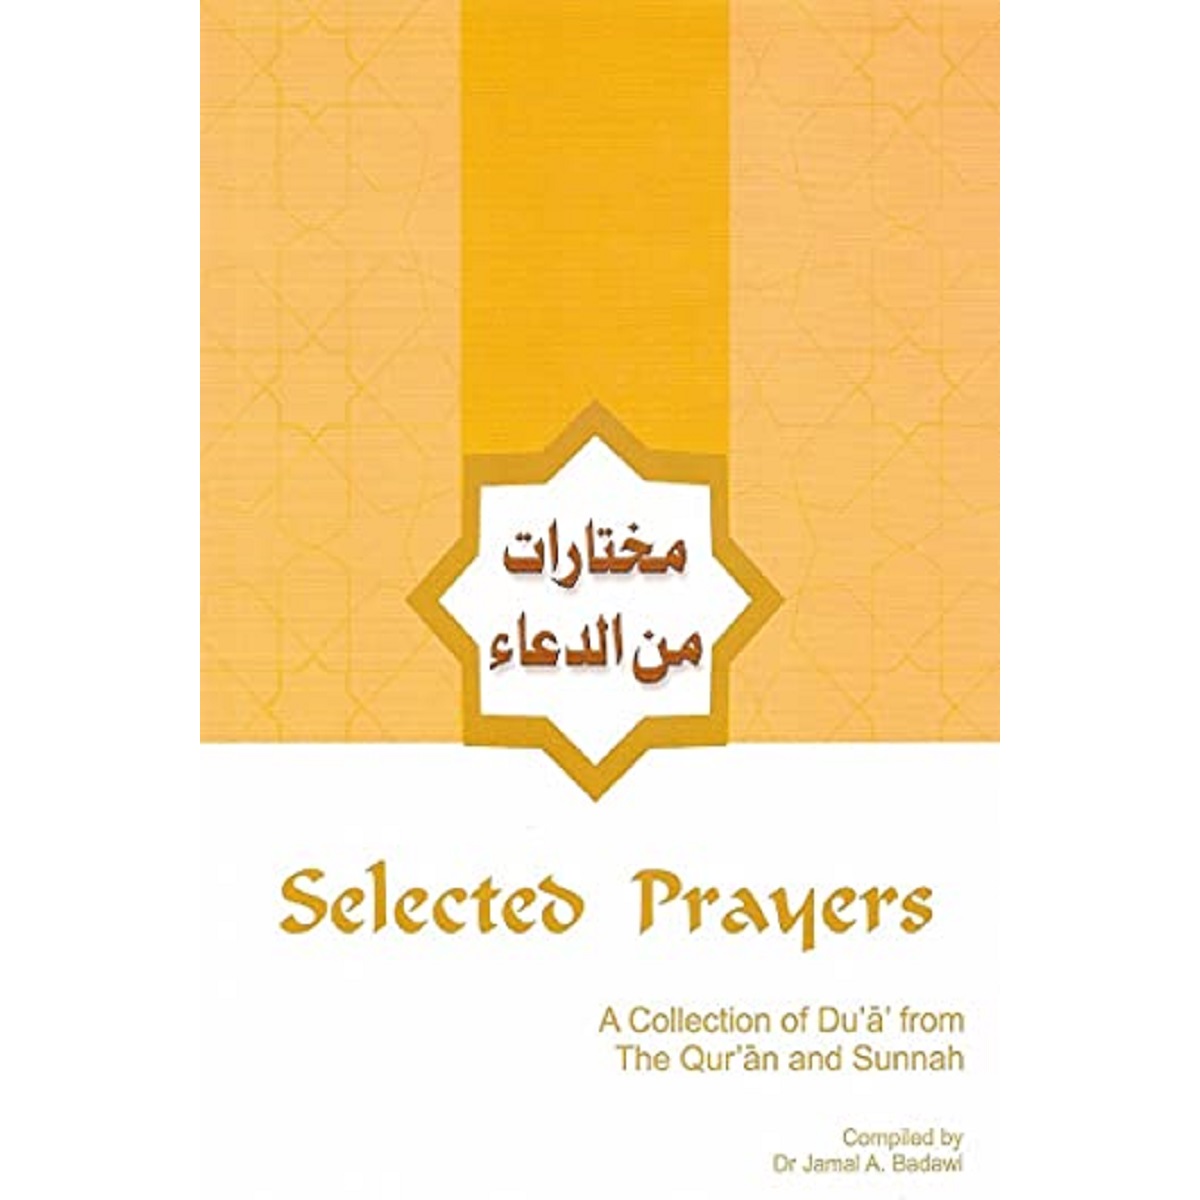 https://www.tarbiyahbooksplus.com/shop/ramadan-shop/ramadan-books/selected-prayers-a-collection-of-dua-from-the-quran-and-sunnah-by-dr-jamal-a-badawi/